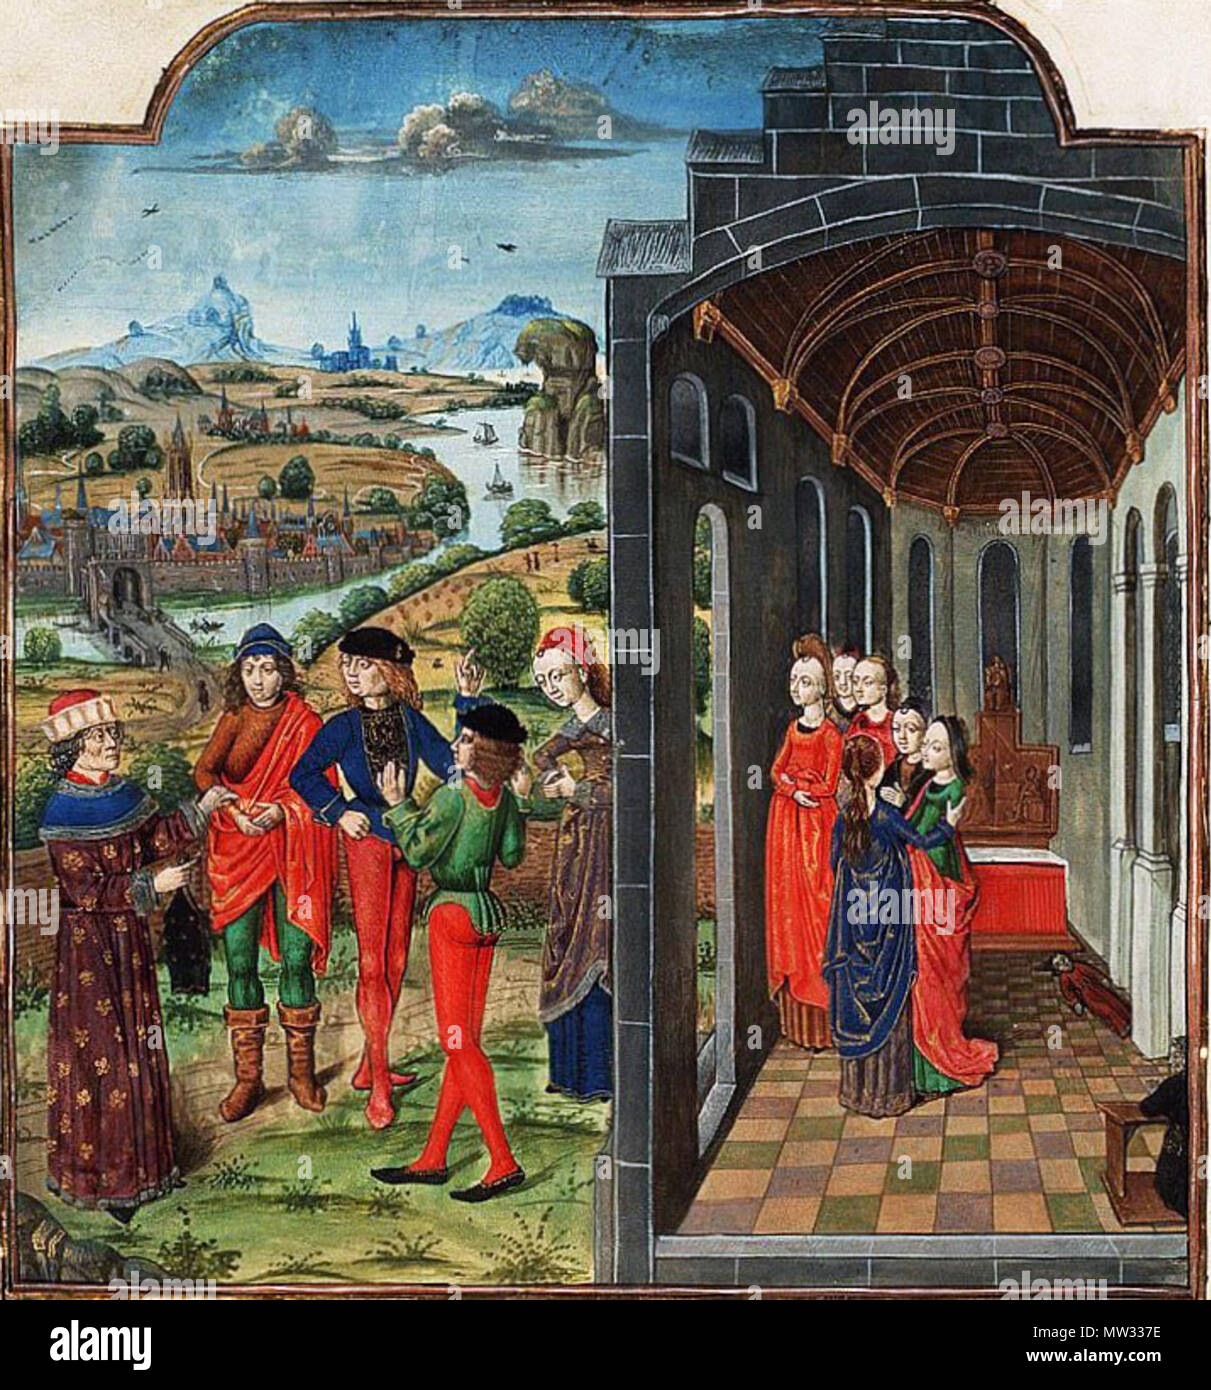 . English: Giovanni Boccaccio and Florentines who have fled from the plague Contents: Giovanni Boccaccio, Le Decameron. Translated from the Italian by Laurent de Premierfait Place of origin, date: Bruges, Master of 1482 and follower (illuminators); c. 1485 Material: Vellum, ff. 440, 457x334 (289x202) mm, 37 lines, littera hybrida, Binding: 18th-century brown leather; gilt; with coat of arms of Stadholder William V Decoration: 7 two-column miniatures (220/205x220/200 mm) with decorated initials; penwork initials with pen-flourishes (only ff. 2r-16v) Provenance: Philip of Cleves (d. 1528; signat Stock Photo